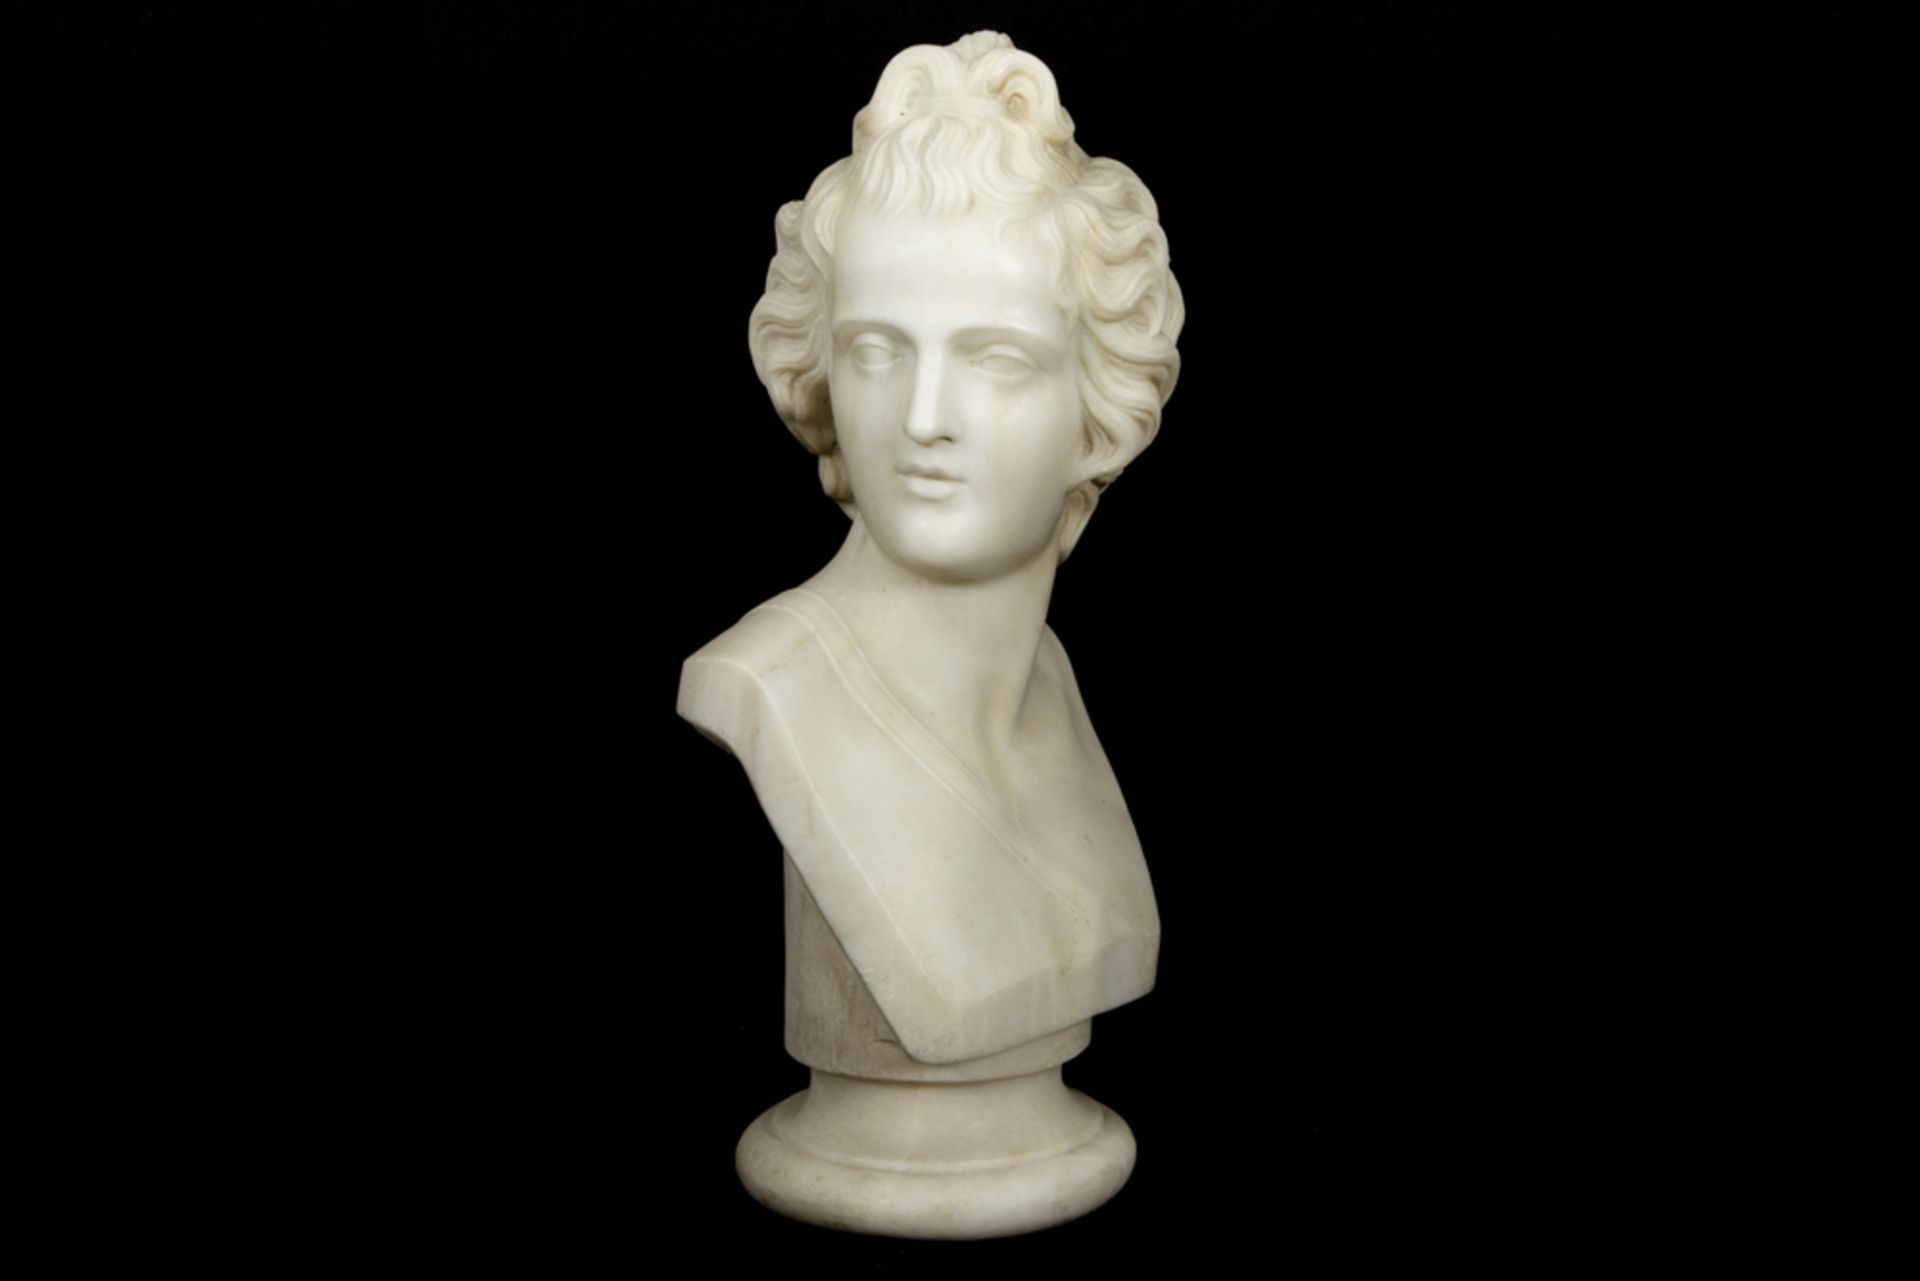 19th Cent. Ioannis Kossos signed "Bust of a Greek Adonis" sculpture in Carrara marble - signed in